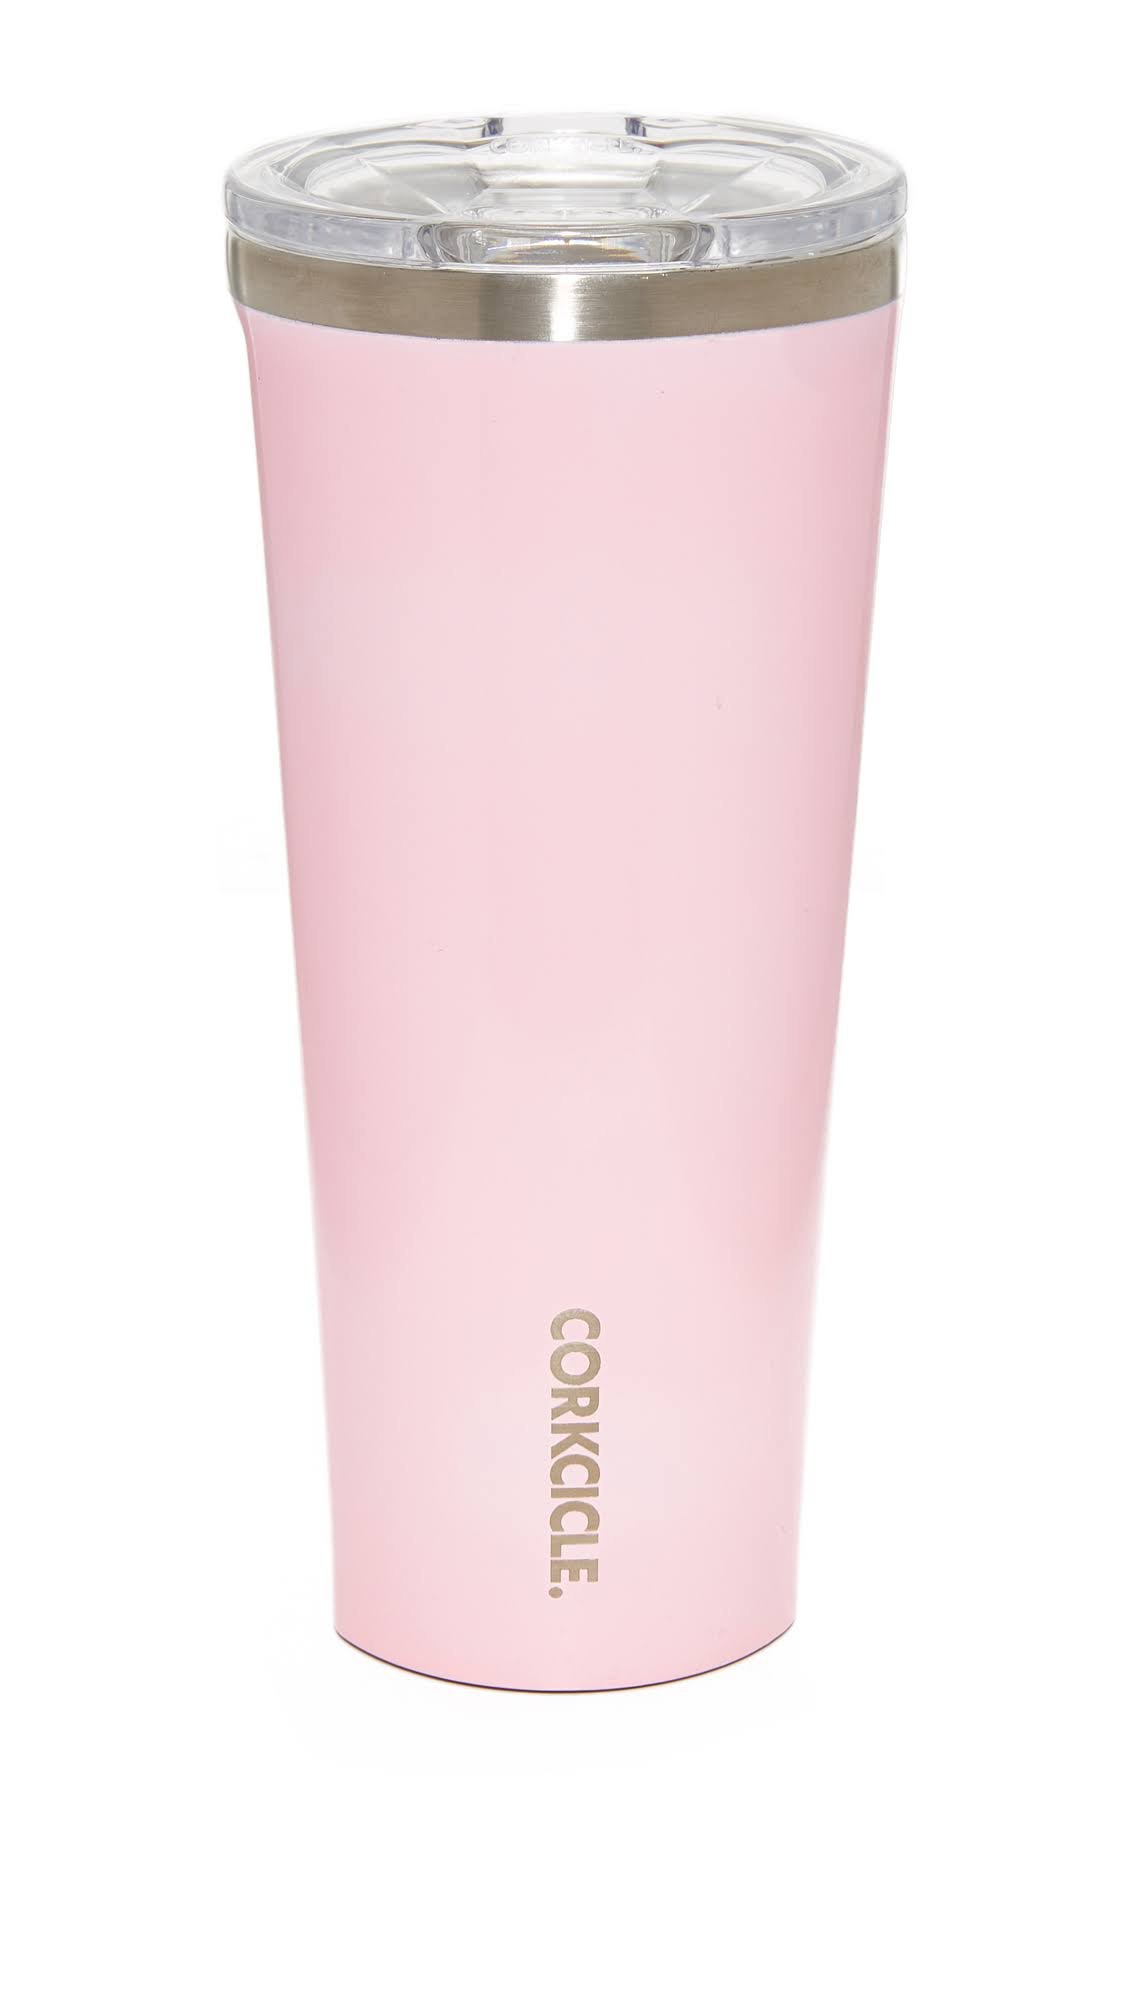 Corkcicle Tumbler Insulated Stainless Steel Bottle Thermos - 24oz, Rose Quartz